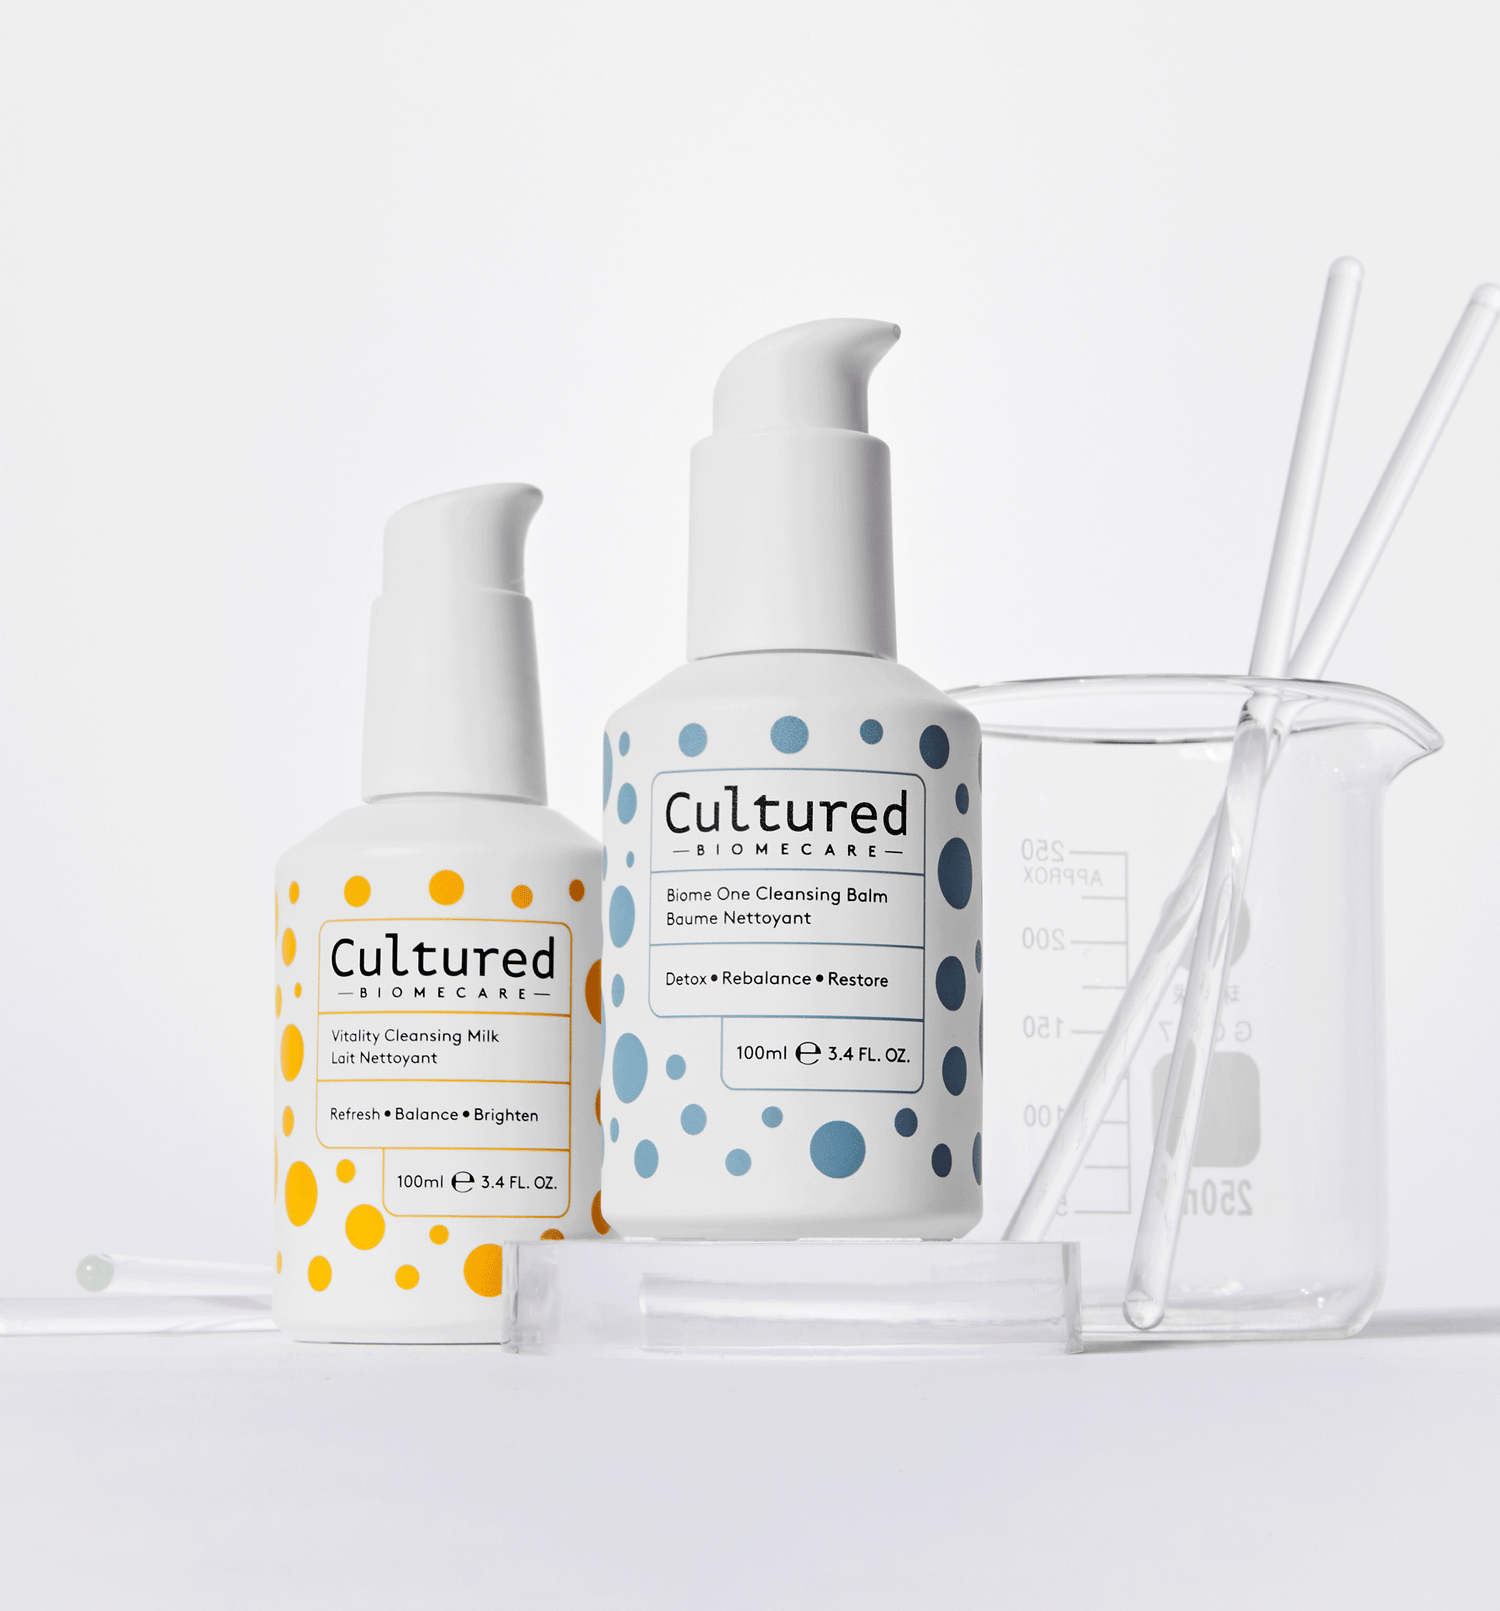 Vitality Cleansing Milk and Biome One Cleansing Balm skincare bottles in front of clear lab glassware & white background.